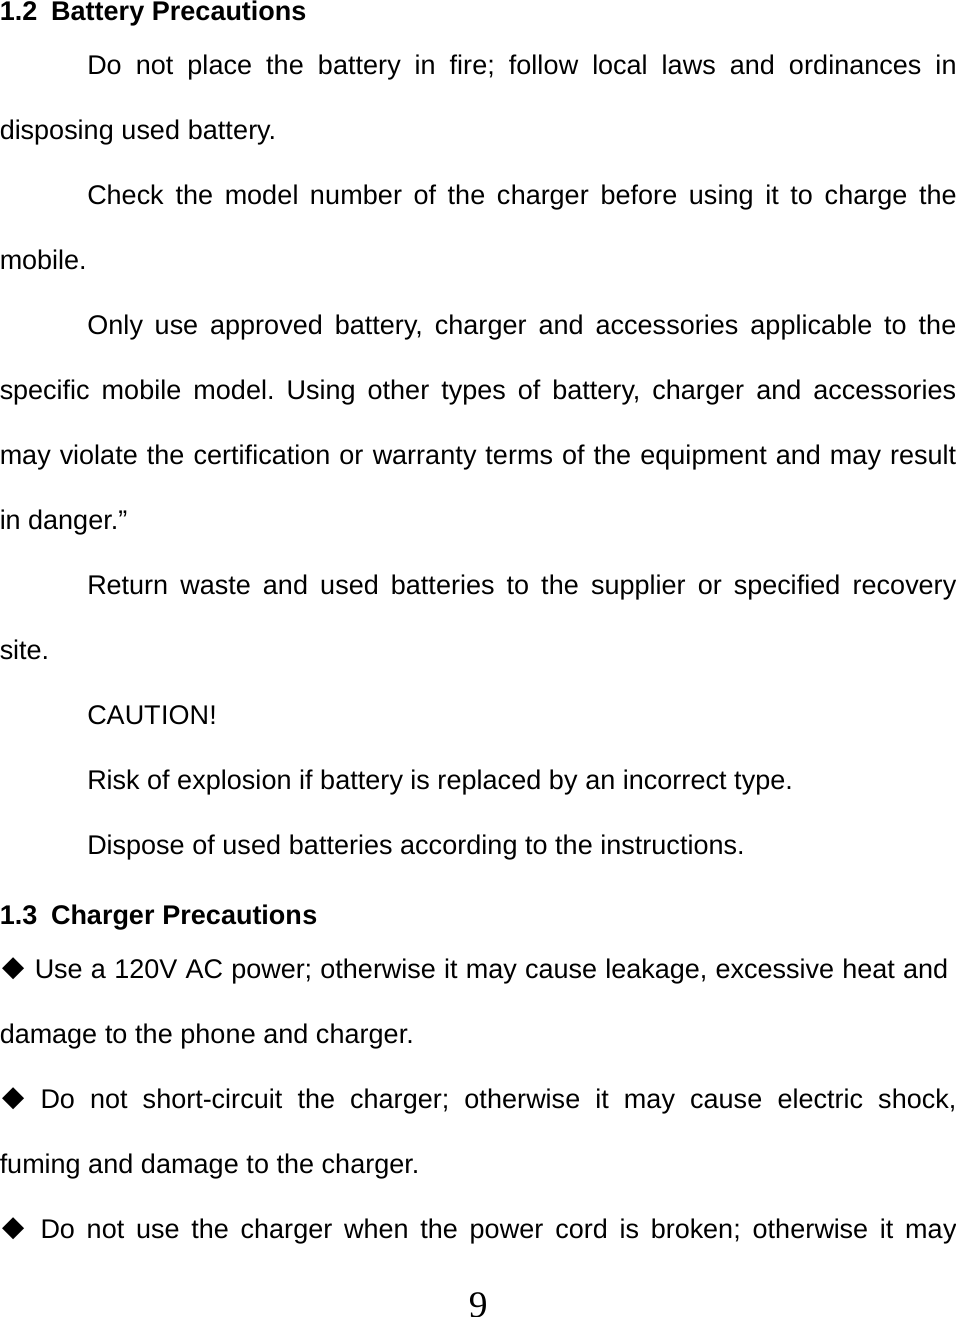   91.2 Battery Precautions Do not place the battery in fire; follow local laws and ordinances in disposing used battery. Check the model number of the charger before using it to charge the mobile. Only use approved battery, charger and accessories applicable to the specific mobile model. Using other types of battery, charger and accessories may violate the certification or warranty terms of the equipment and may result in danger.” Return waste and used batteries to the supplier or specified recovery site. CAUTION! Risk of explosion if battery is replaced by an incorrect type. Dispose of used batteries according to the instructions. 1.3 Charger Precautions  Use a 120V AC power; otherwise it may cause leakage, excessive heat and damage to the phone and charger.  Do not short-circuit the charger; otherwise it may cause electric shock, fuming and damage to the charger.  Do not use the charger when the power cord is broken; otherwise it may 